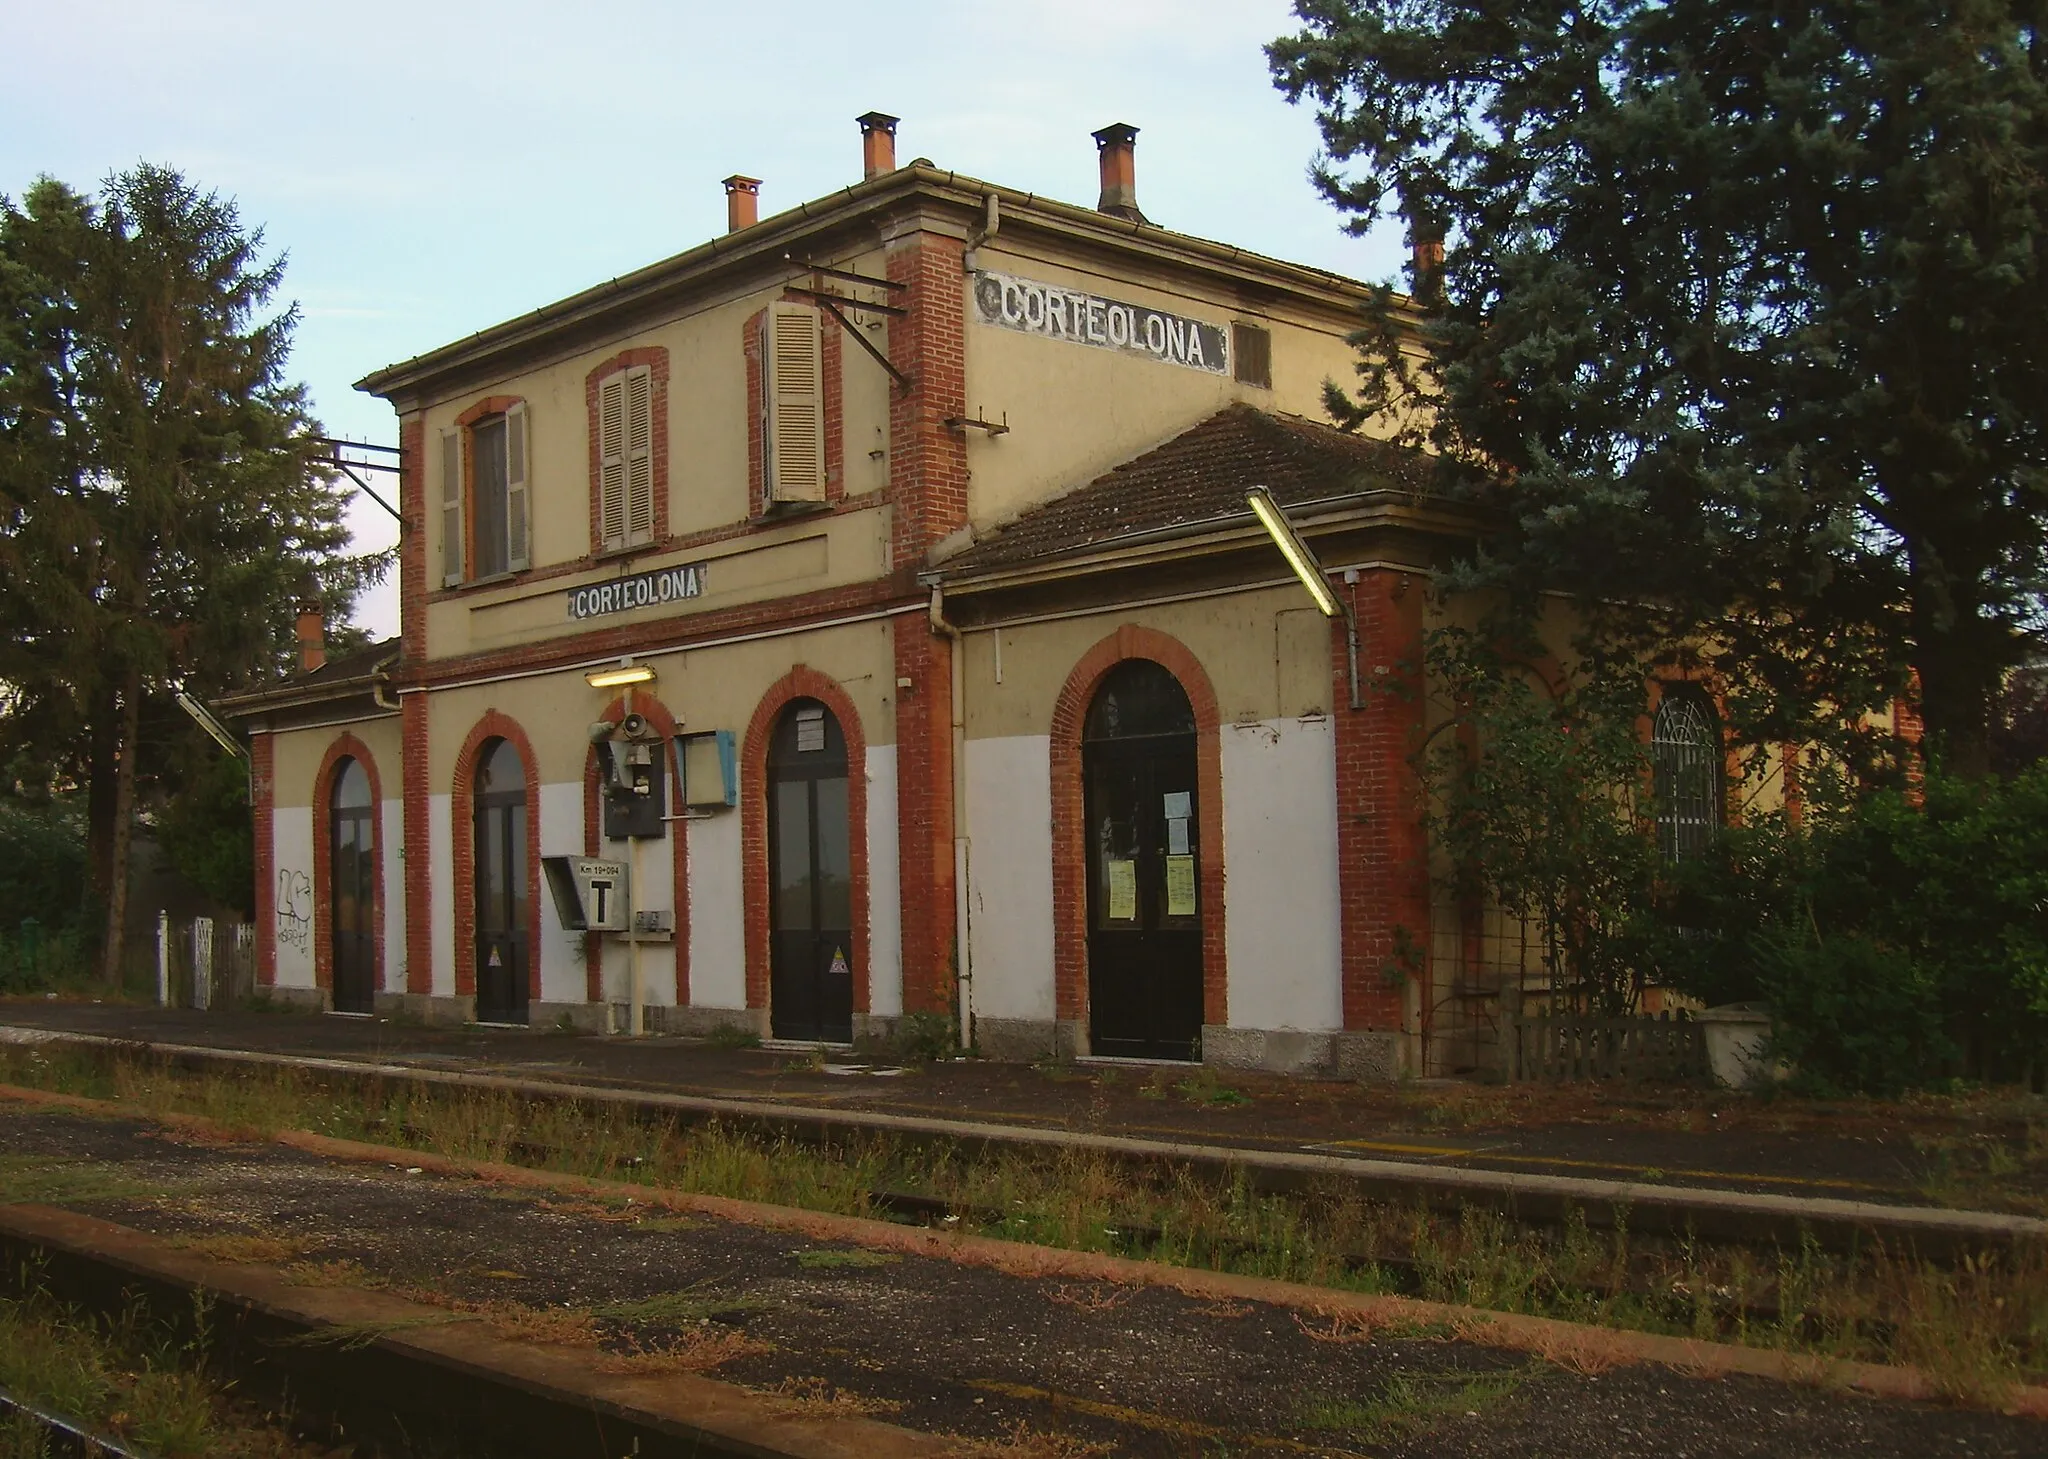 Photo showing: Railway station in Corteolona, Italy.